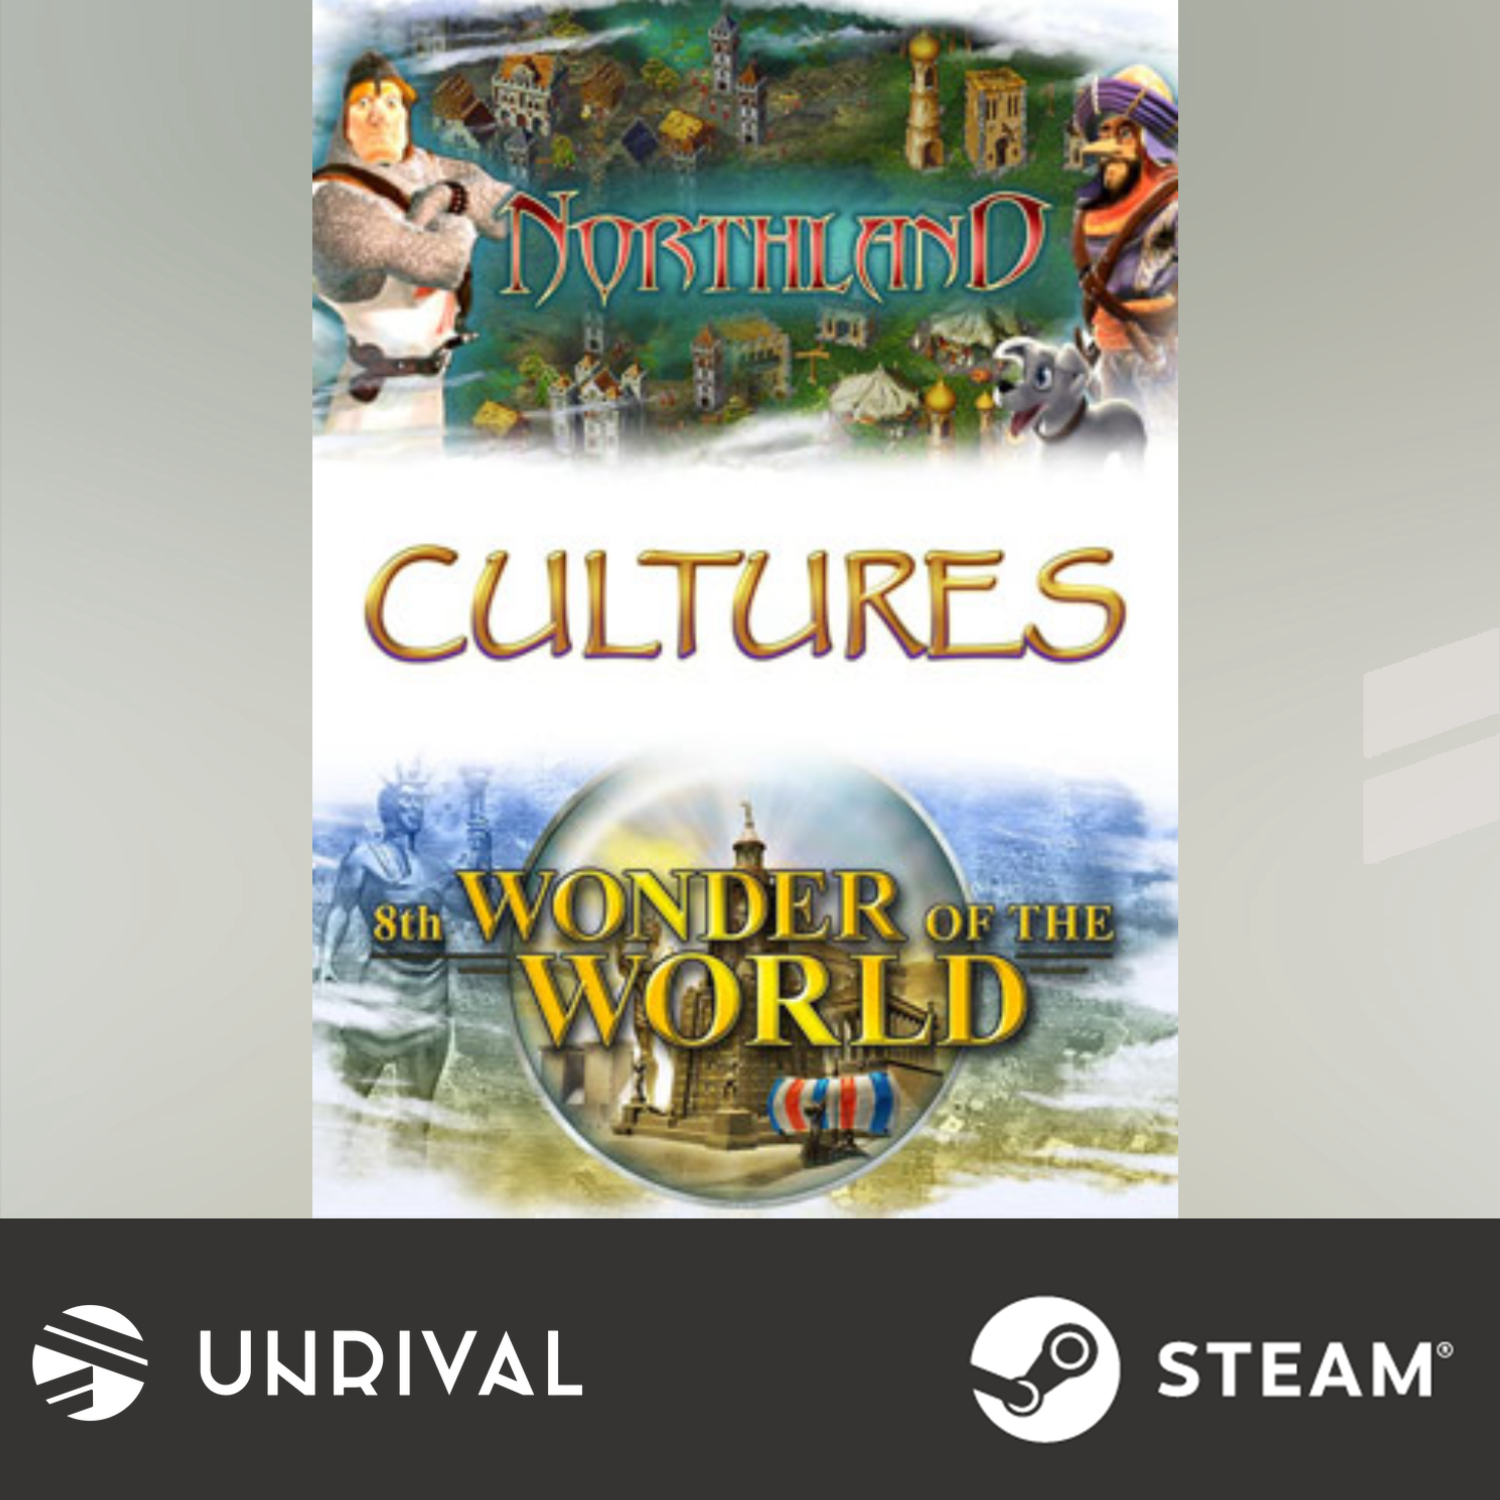 [Hot Sale] Cultures: Northland + 8th Wonder of the World PC Digital Download Game - Unrival